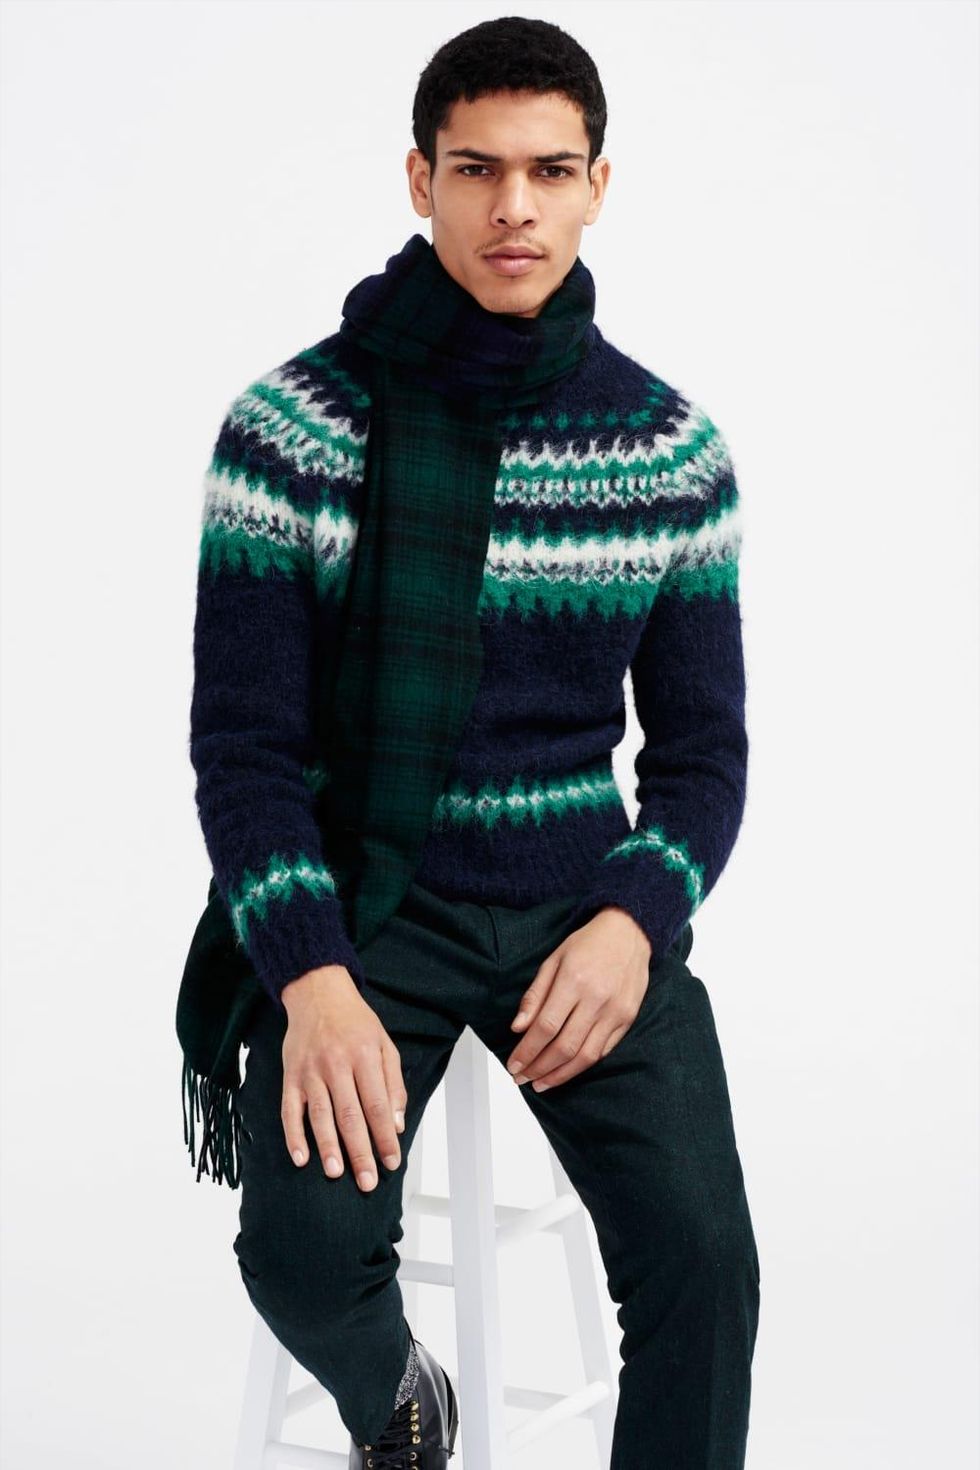 J Crew fall 2016 collection men